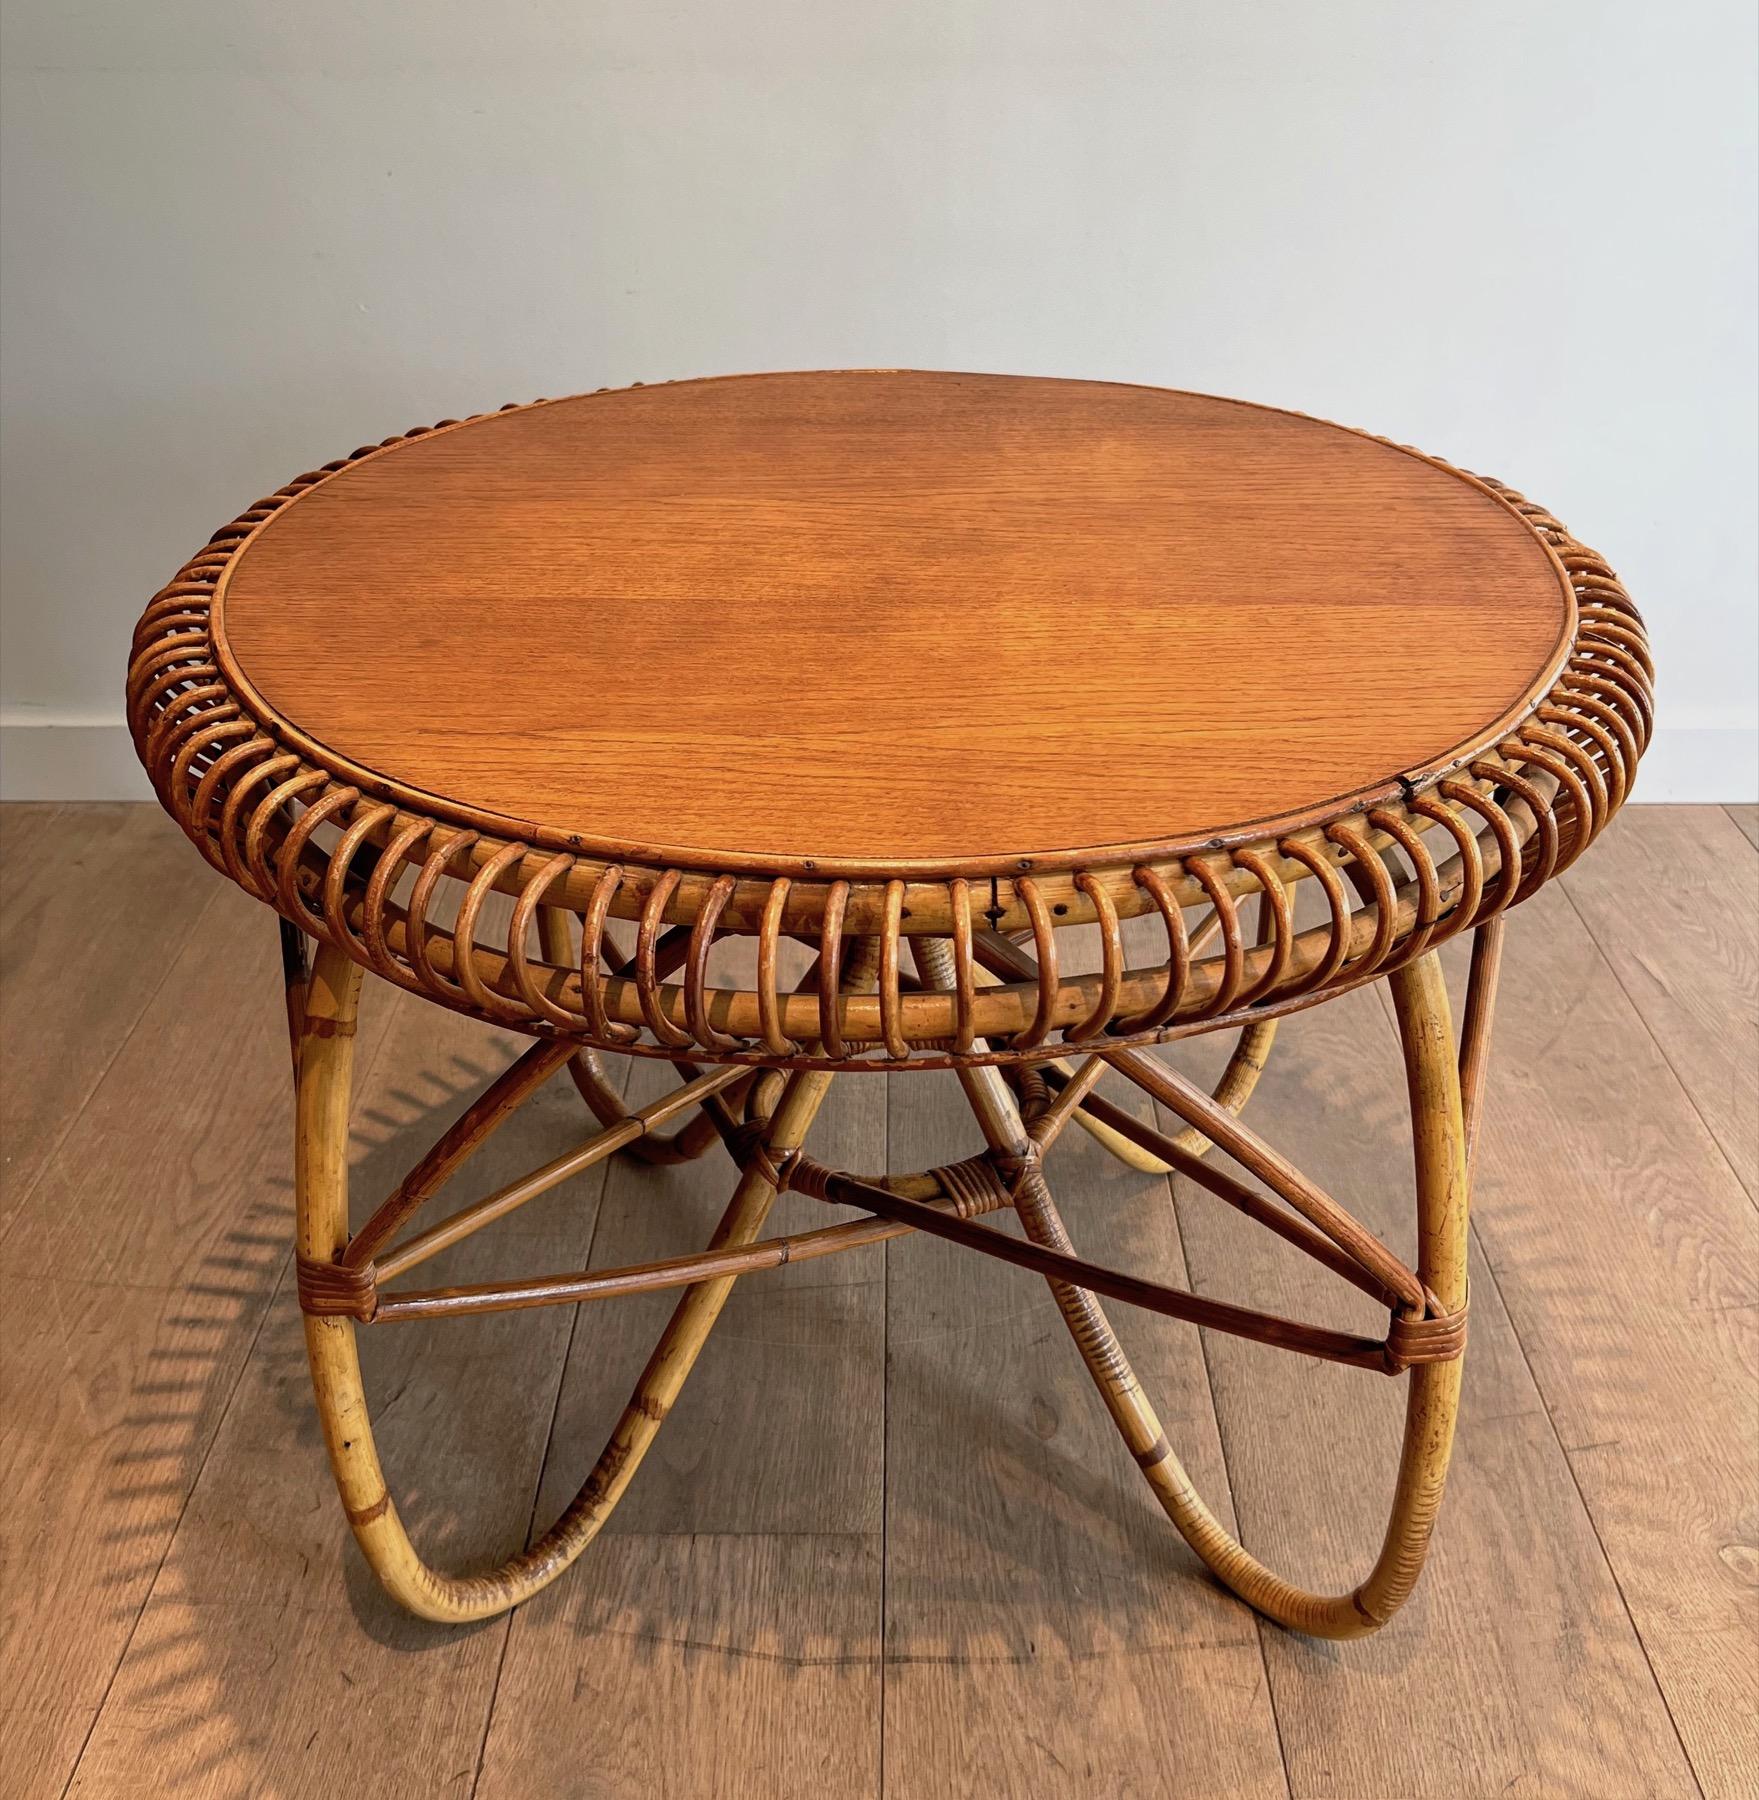 This very nice and unusual round coffee table is made of a very nice rattan work with a wooden top. This is an Italian work in the Style of famous designer Franco Albini. Circa 1950